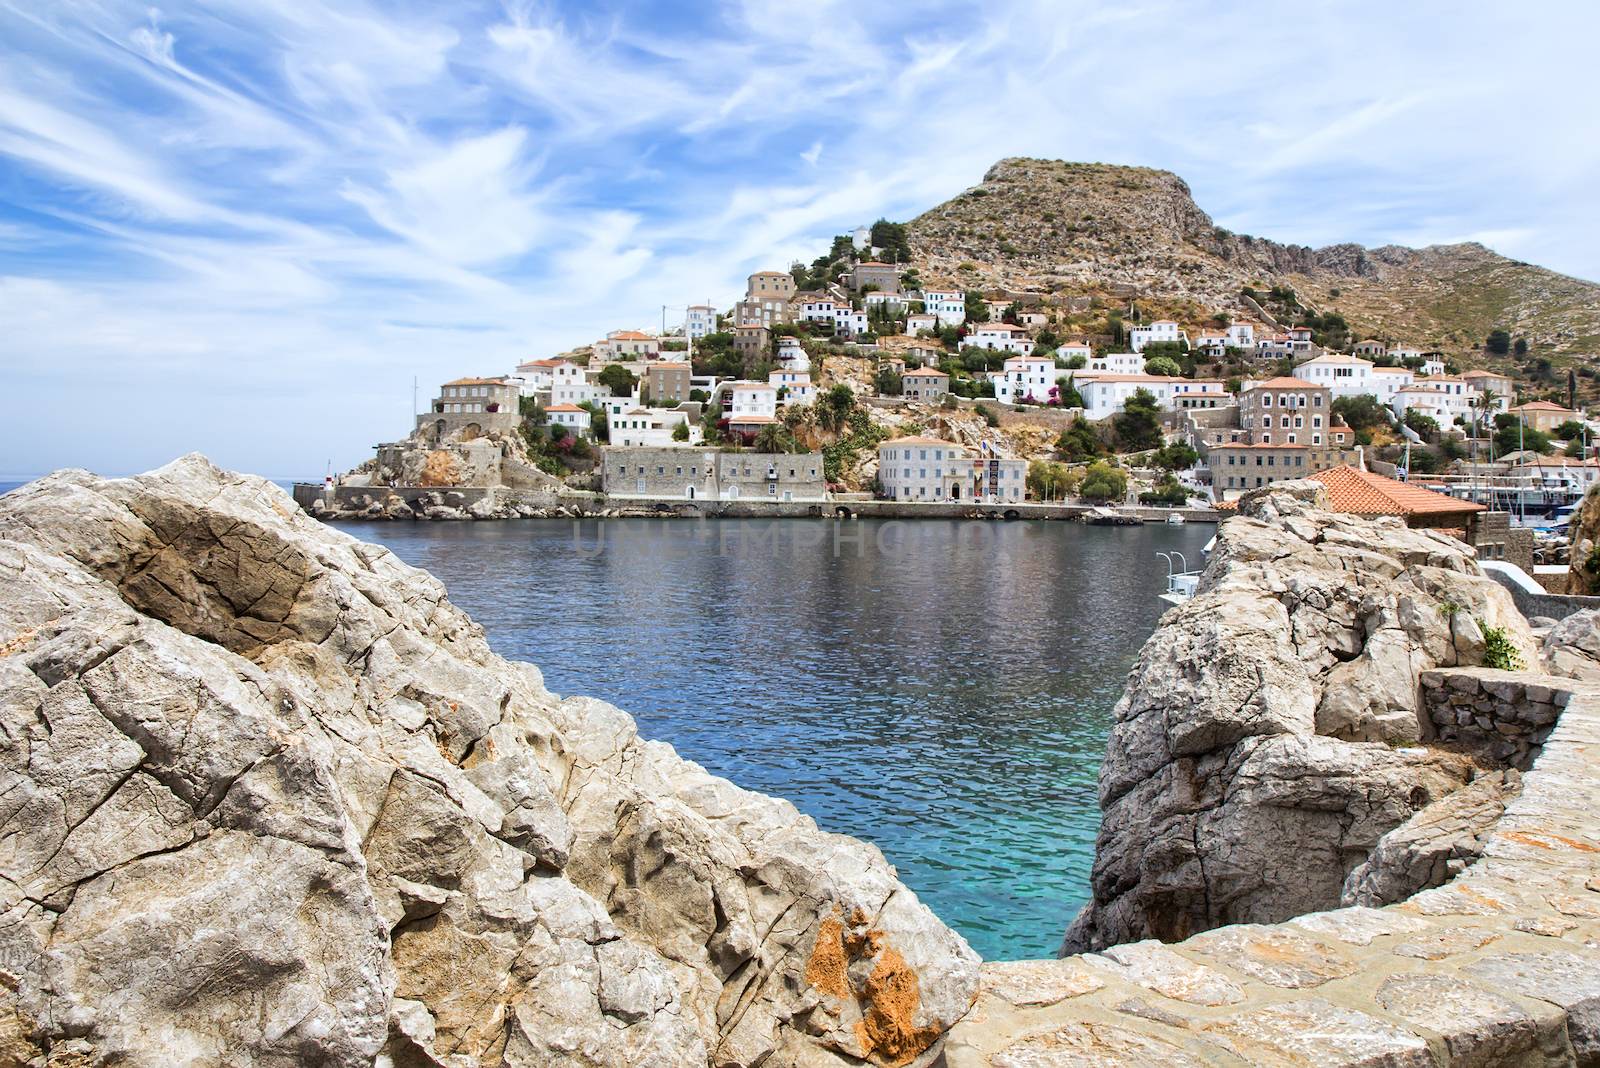 View of Hydra or Ydra, a picturesque Greek Saronic island in the Aegean Sea.